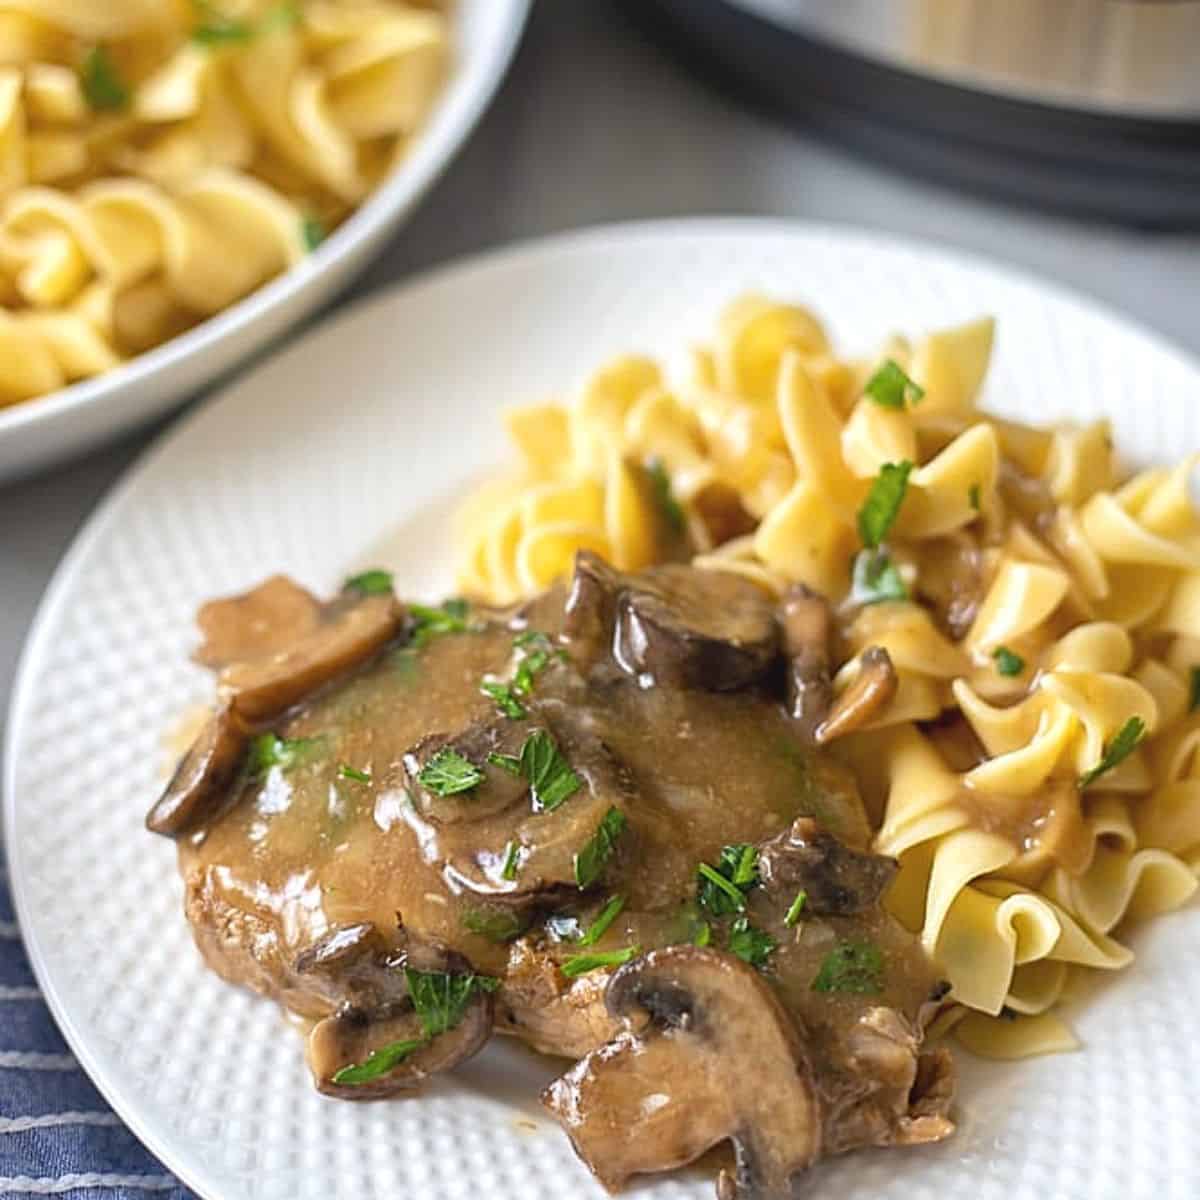 Pork Chop with mushroom gravy and noodles on white plate